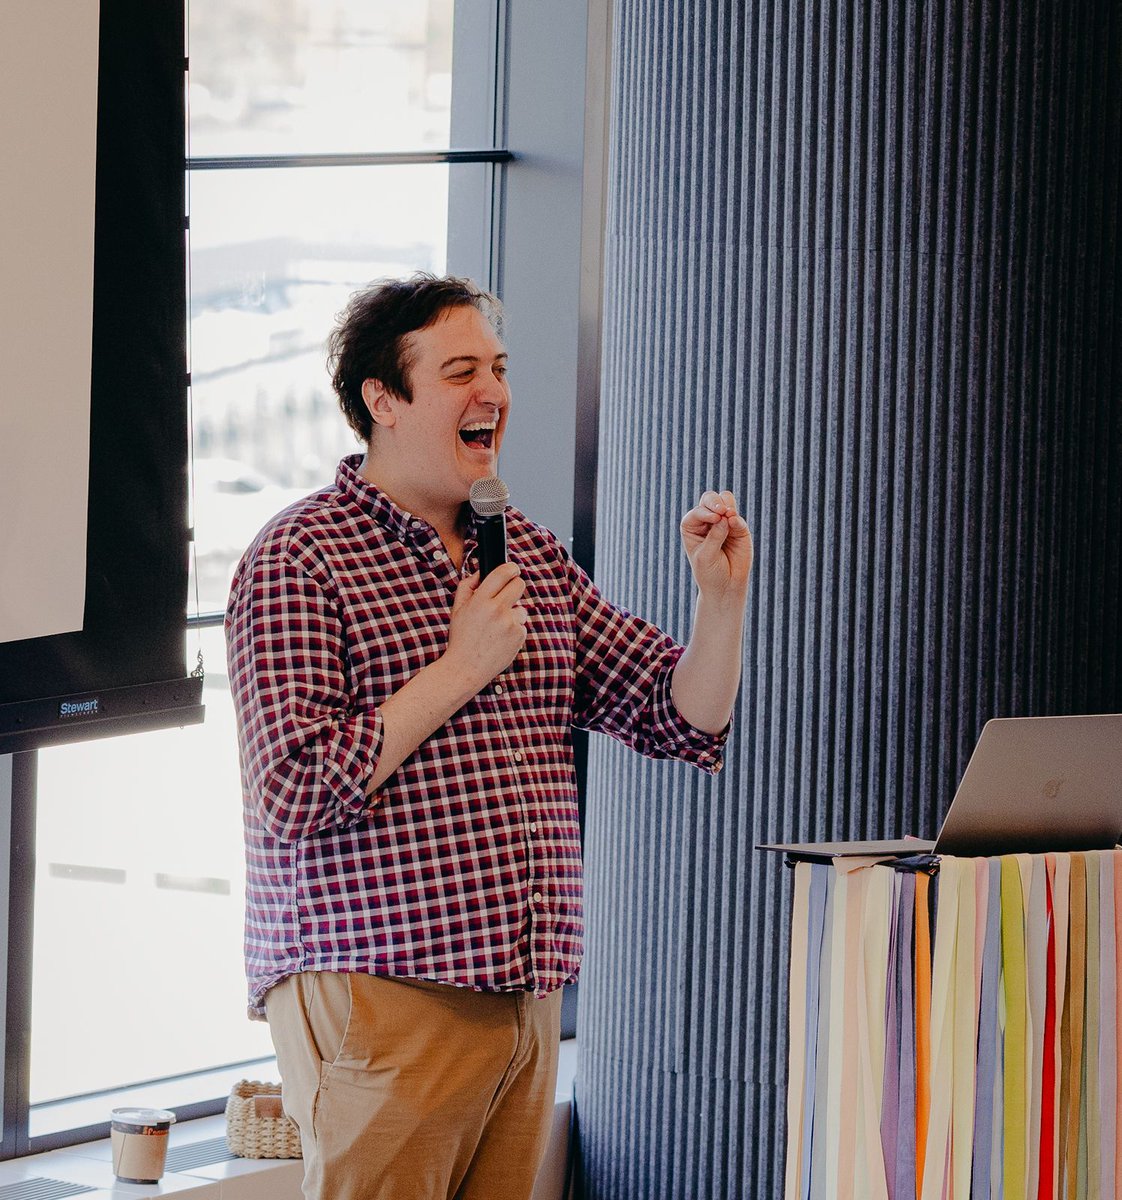 Watch the livestream of our April event with Pete Davis @peteddavis buff.ly/49H0ZMv Thank you to Matthew, Kevin, and Rosario for producing the livestream! And big thanks to our partners @Harvest and @MPBcom #CMNYC #CMvibrant